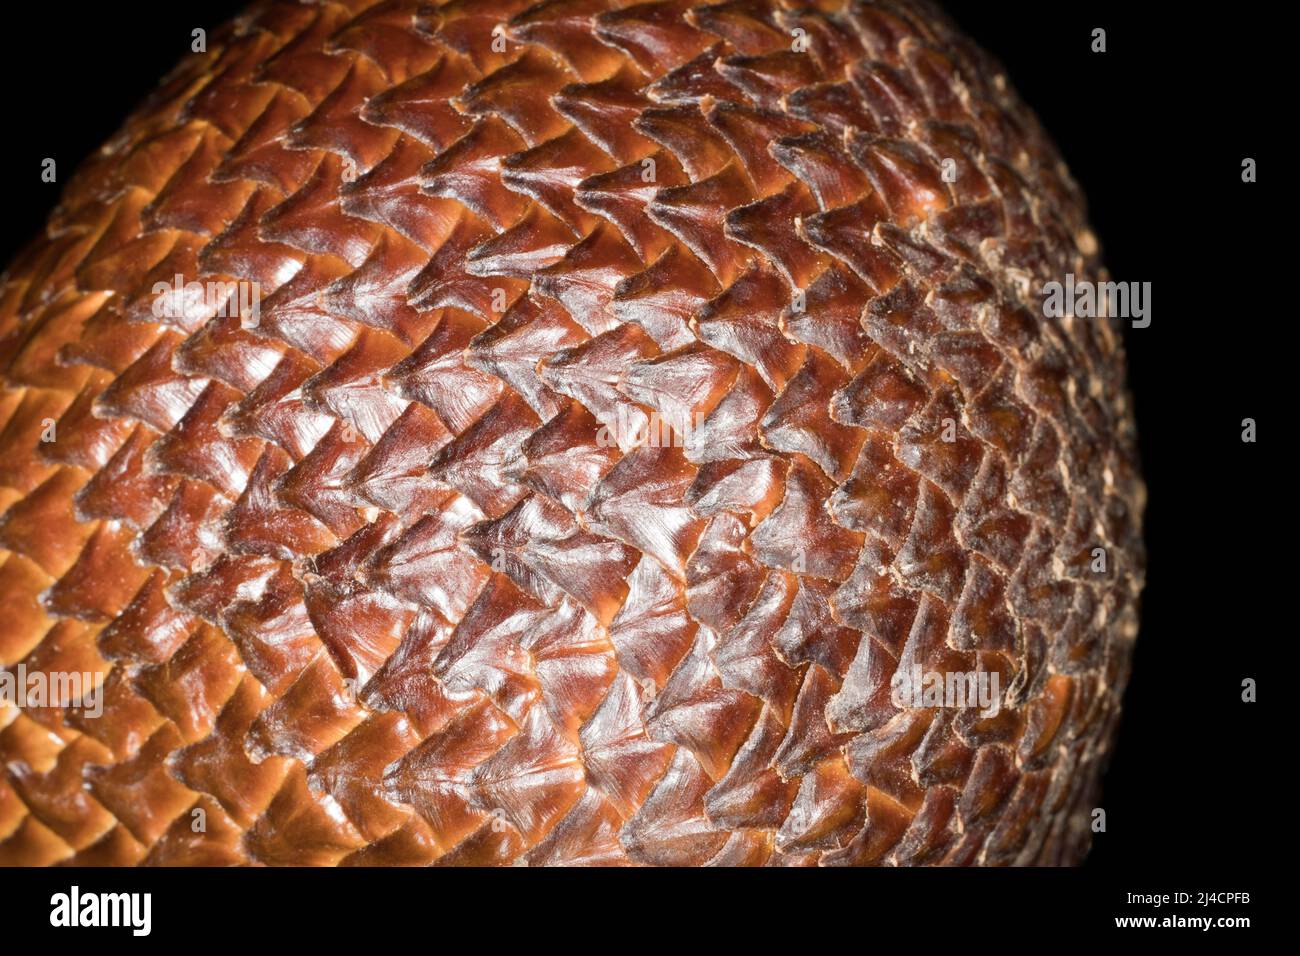 The scaly skin of a salak (Salacca edulis), studio photograph with black background Stock Photo